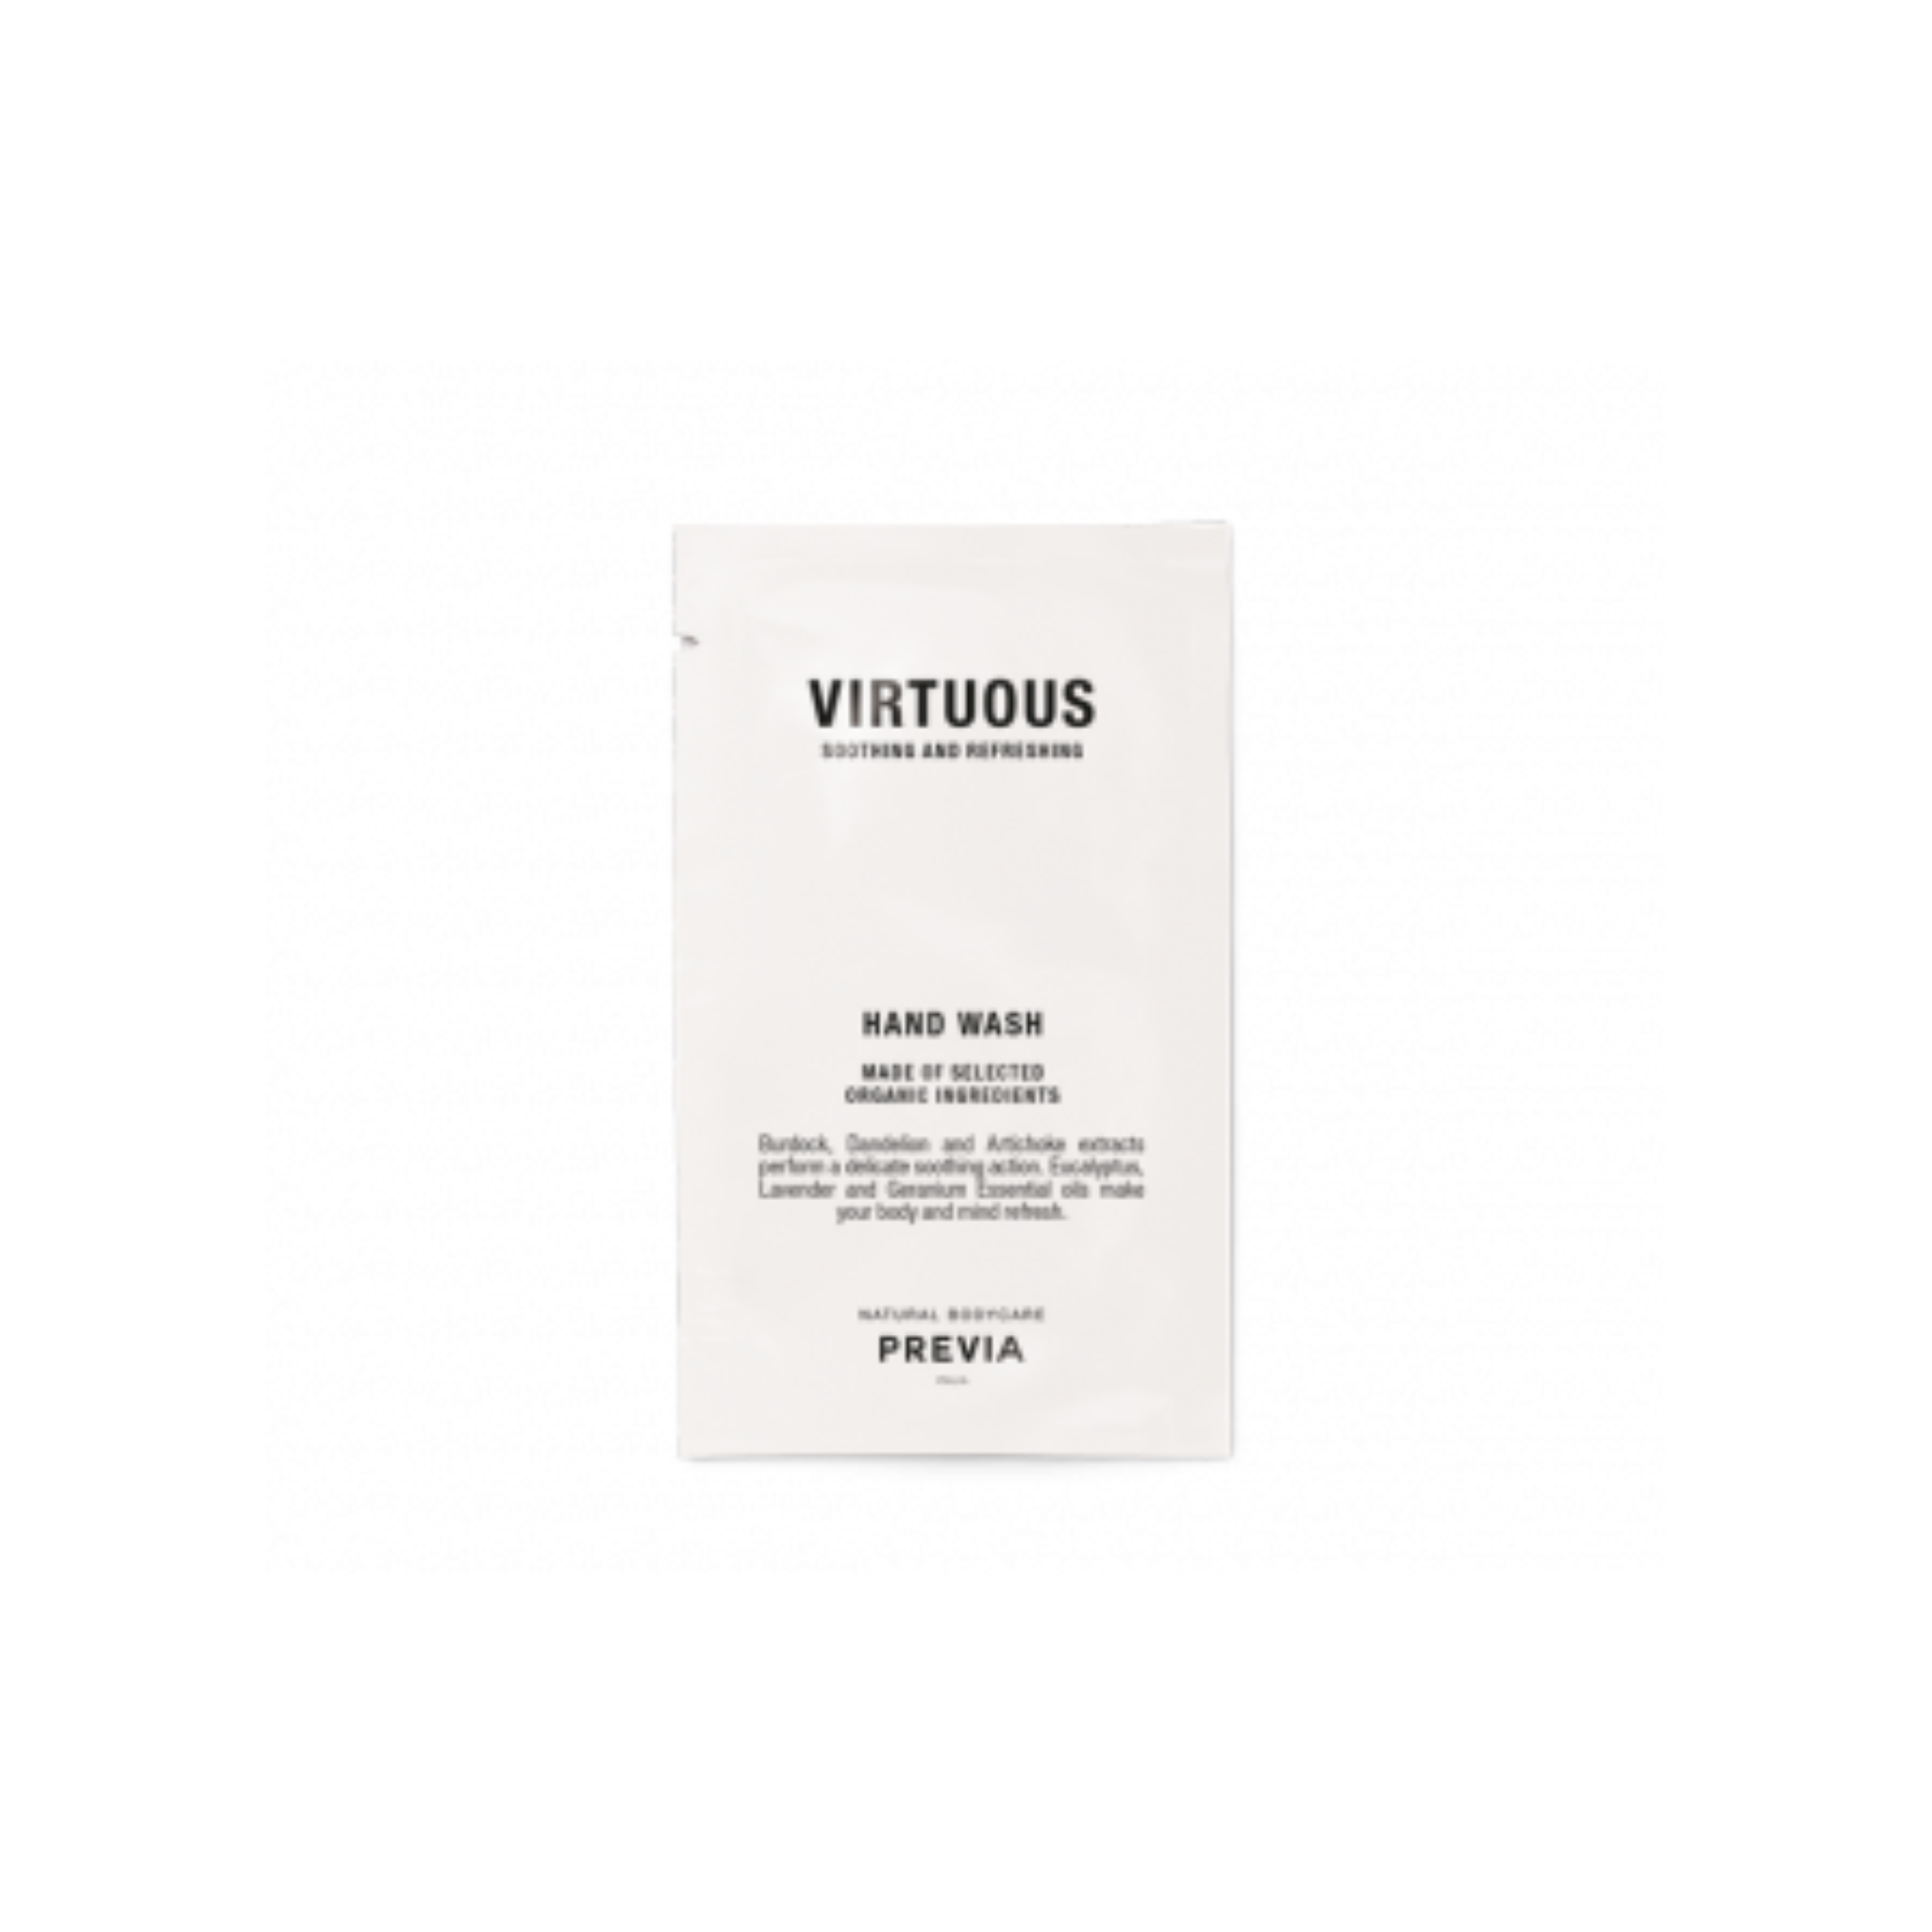 Virtuous Body - Natural Body Care Hand Wash (0.34 oz)